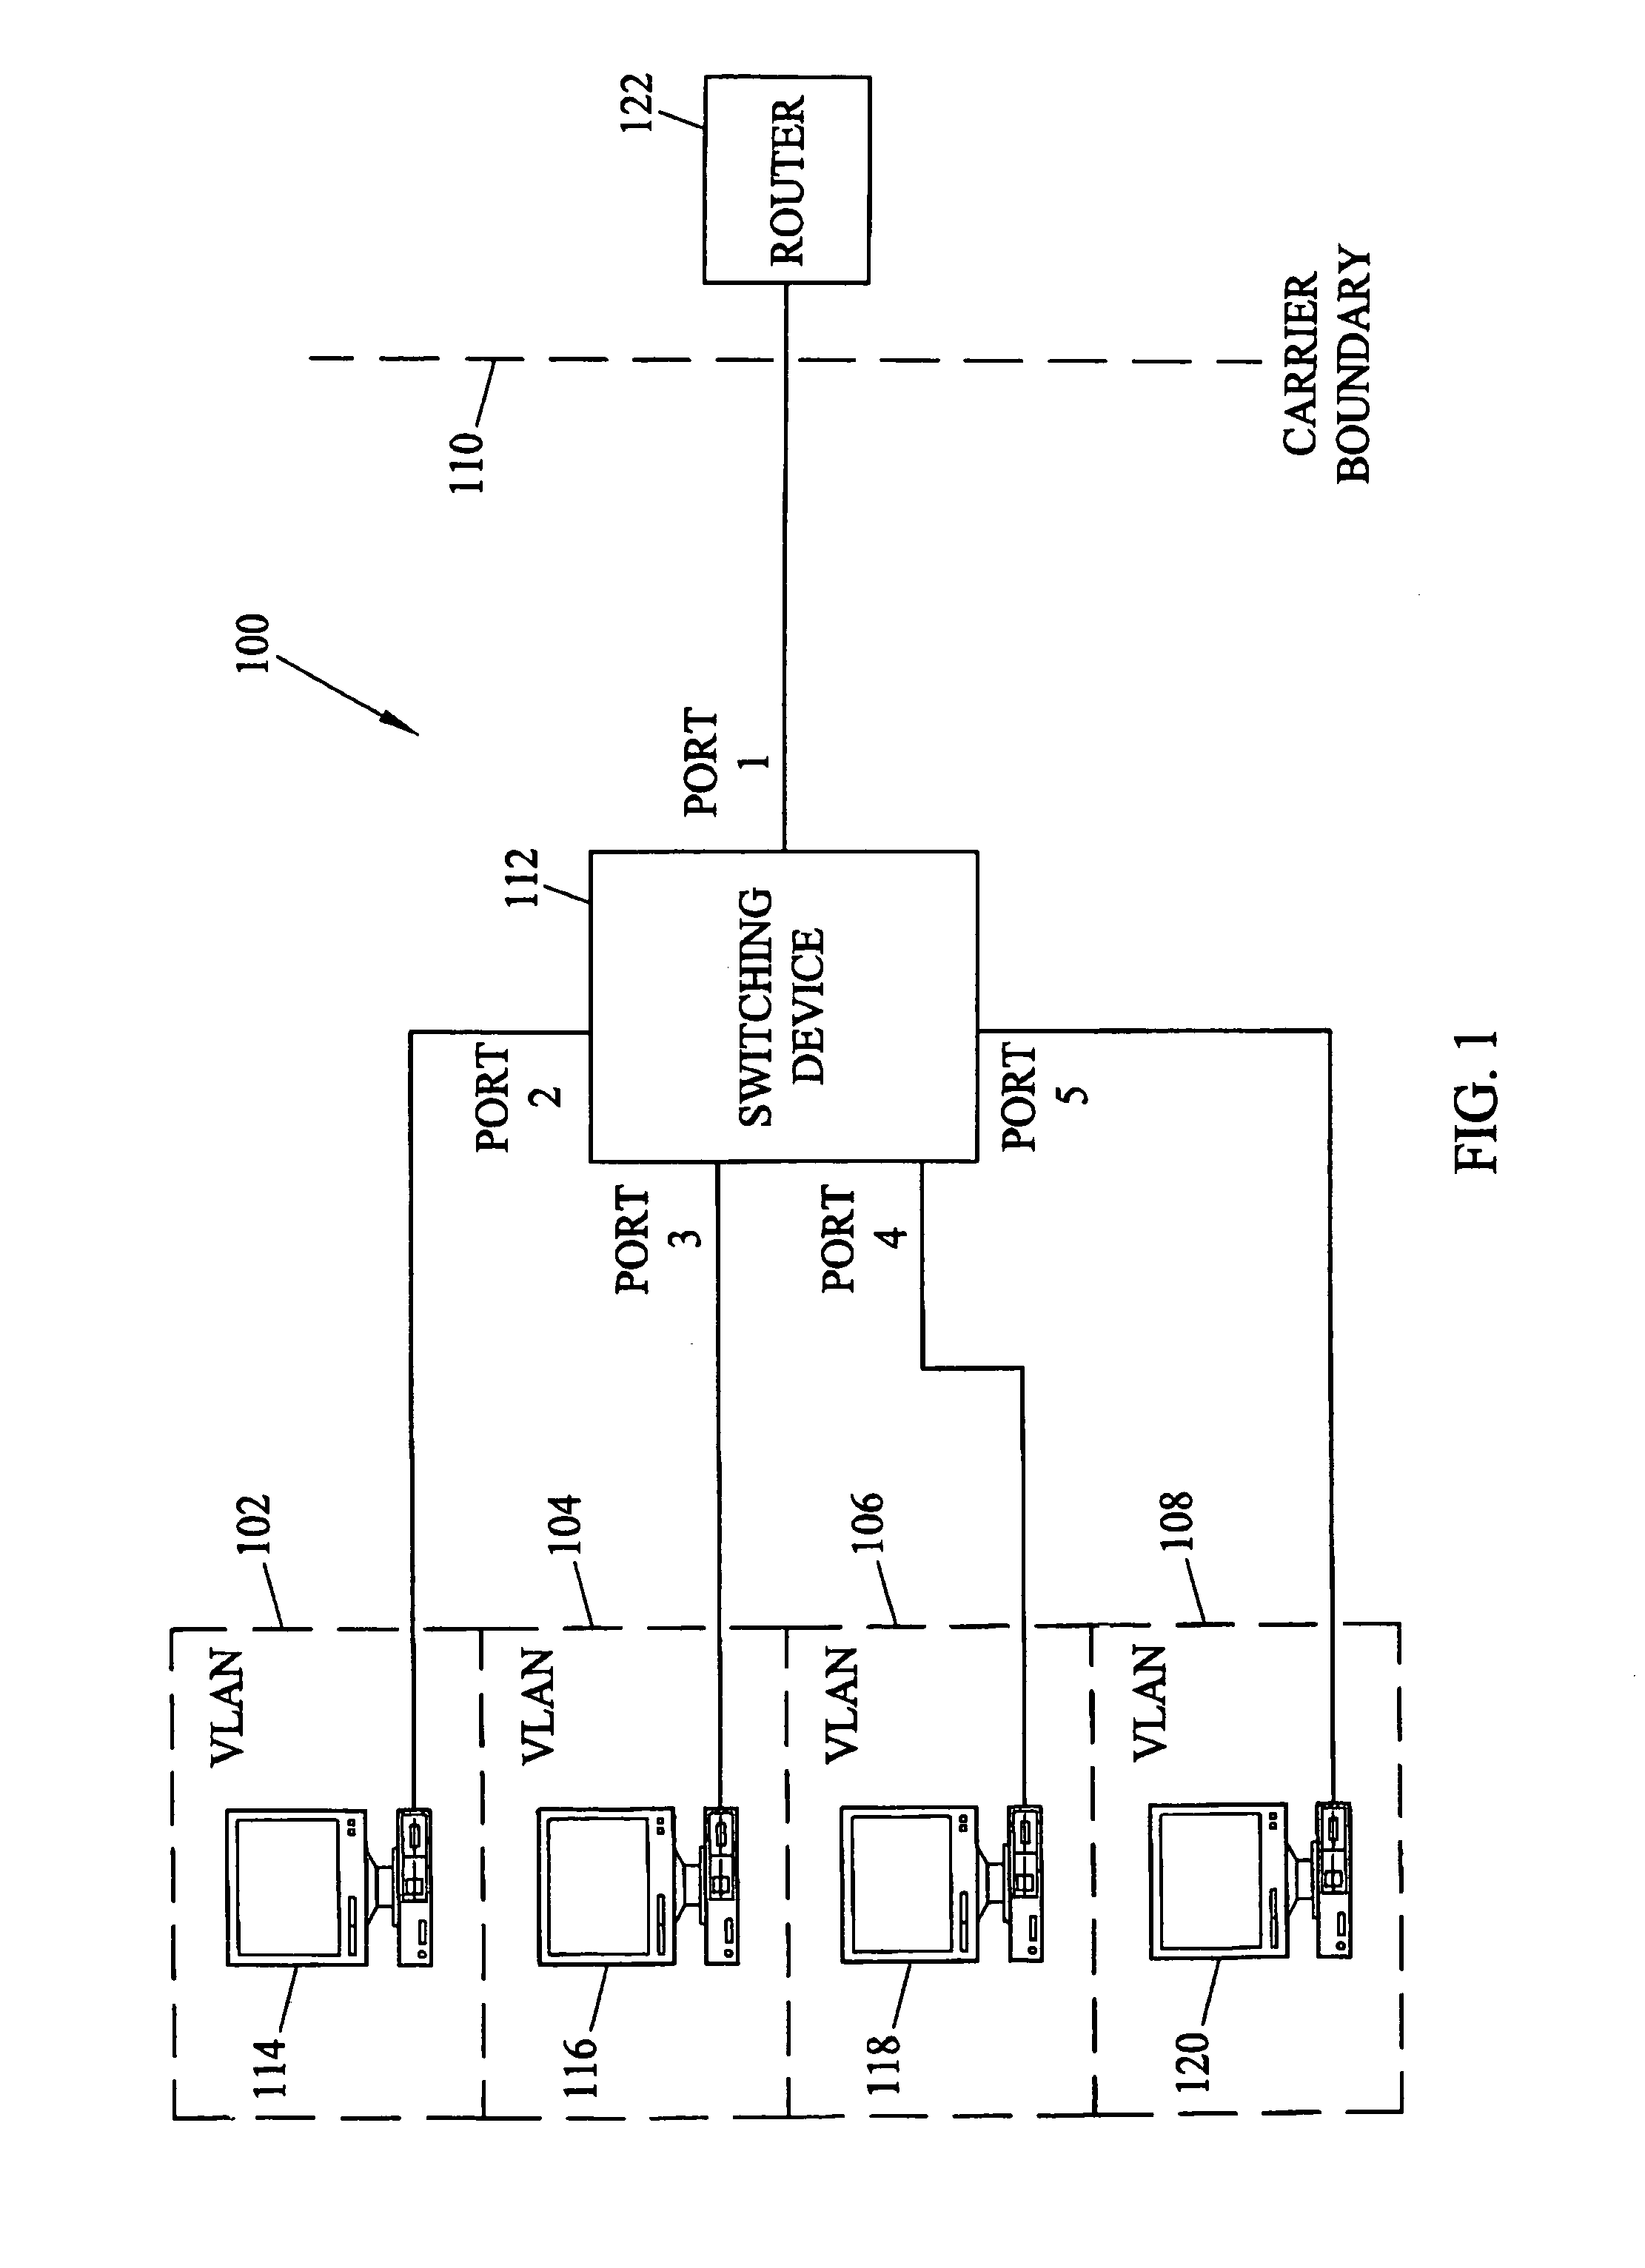 Methods and systems for associating and translating virtual local area network (VLAN) tags